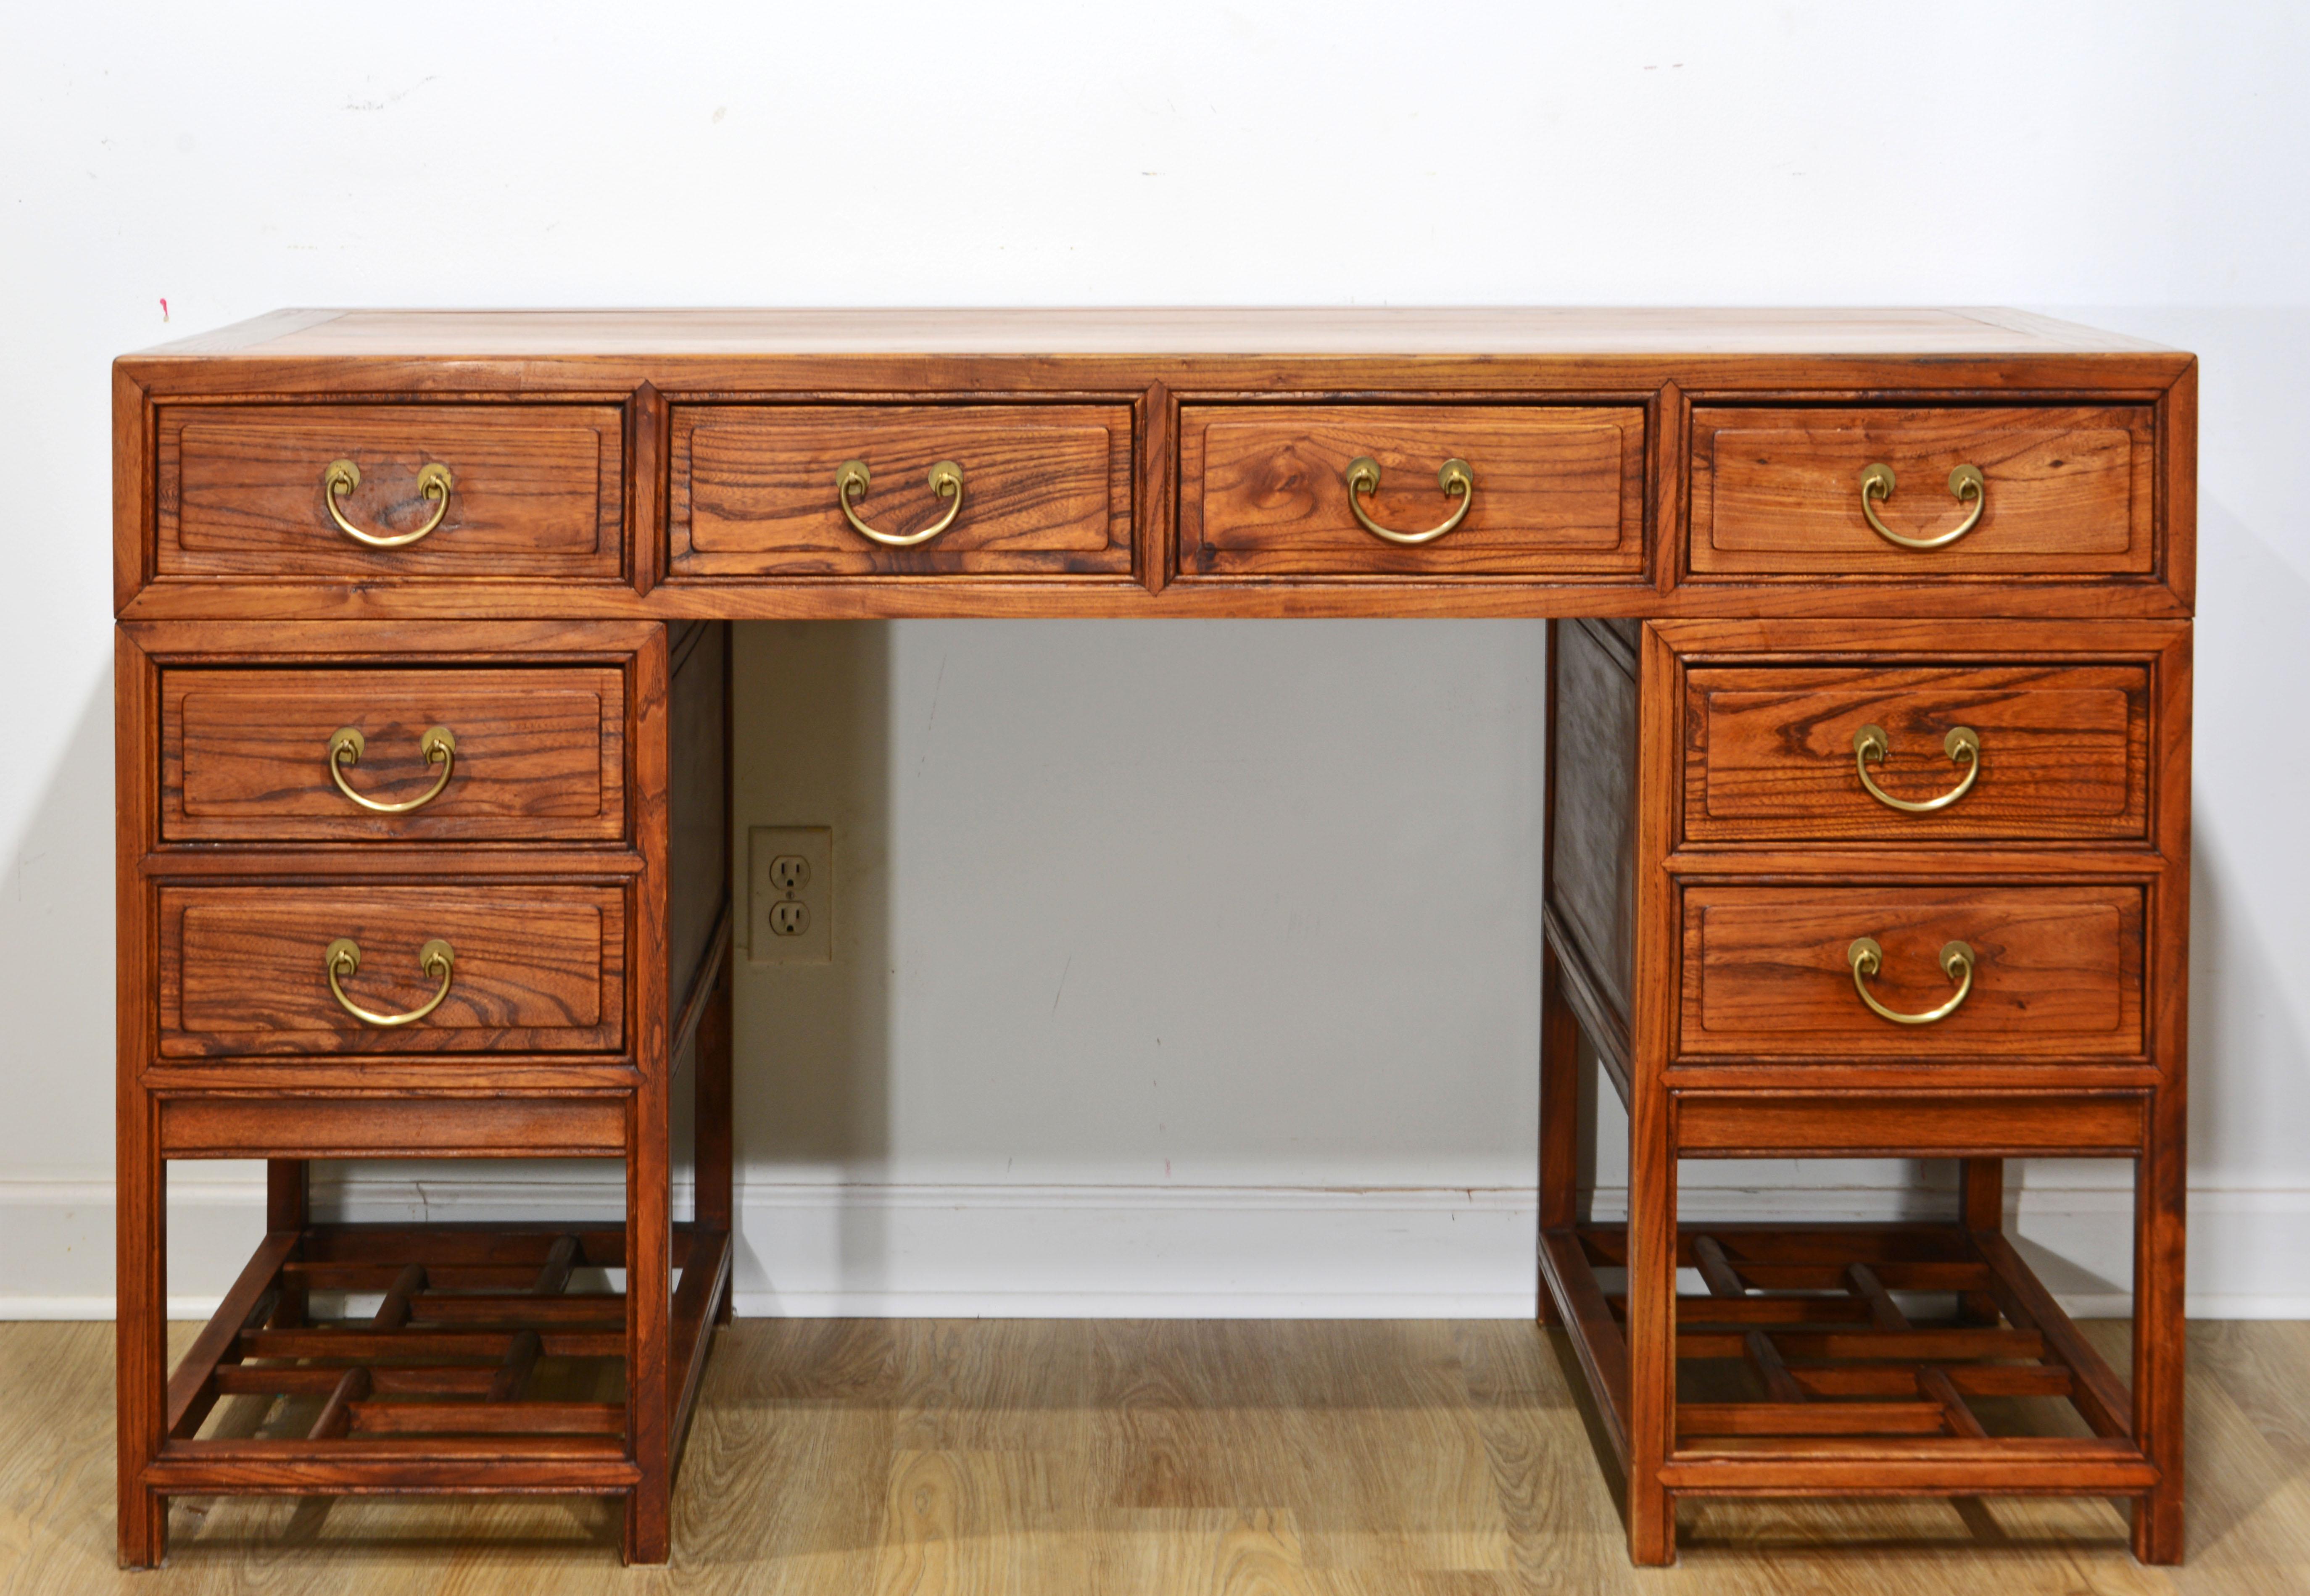 Originally treated with linseed oil this Chinese Ming style scholar's desk retains the warm color and beautiful grain. The top is plank framed on all sides adding a look of quality craftsmanship. The desk is in three parts making it easy to move.